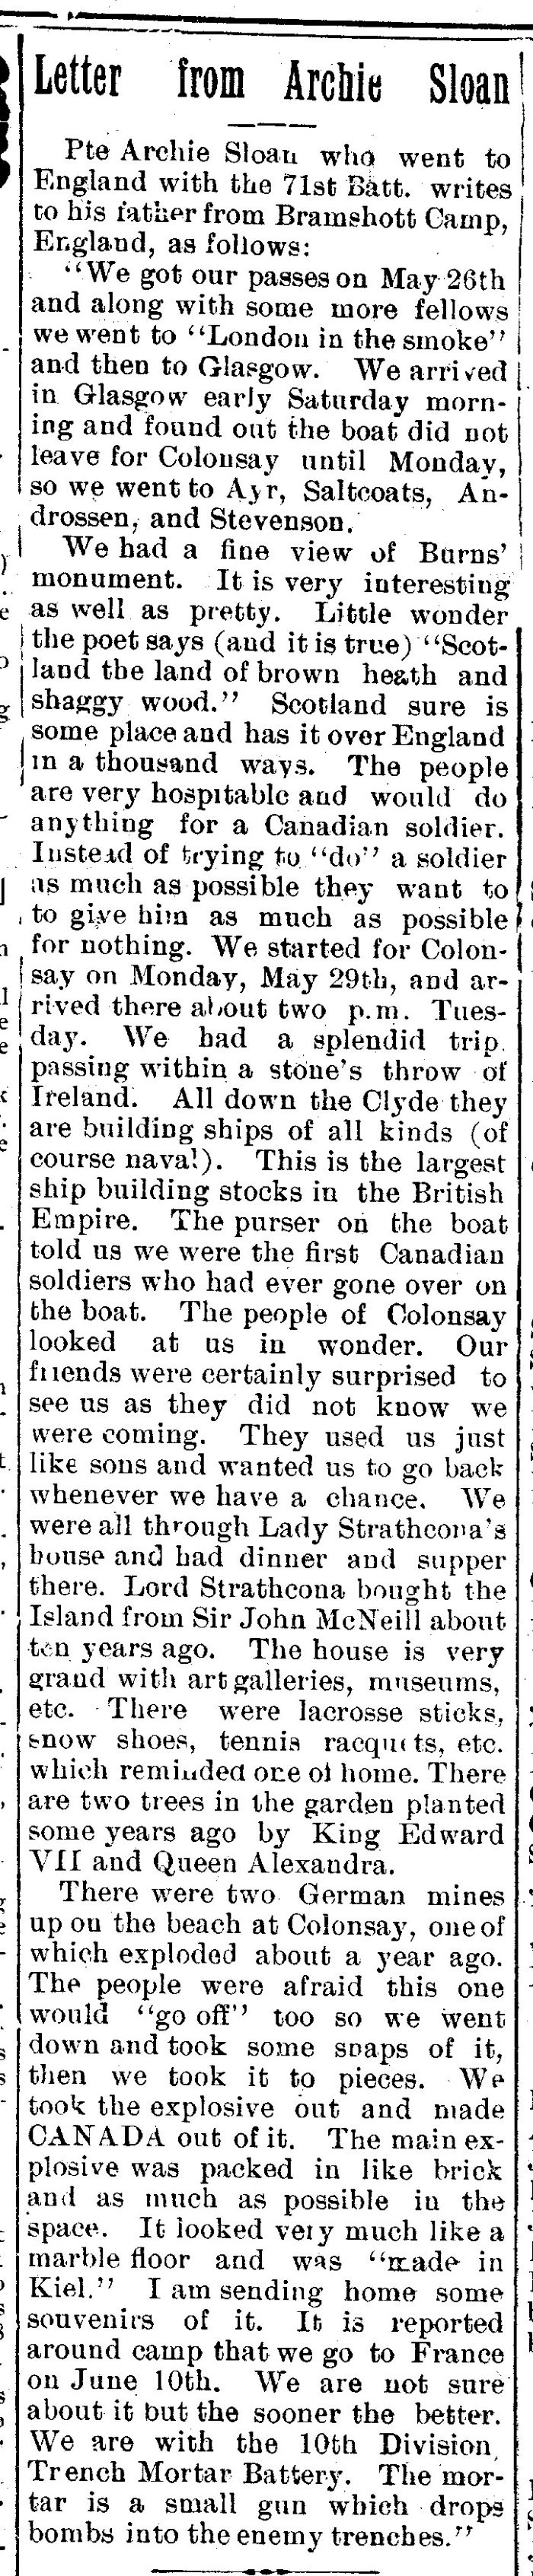 The Chesley Enterprise, July 6, 1916